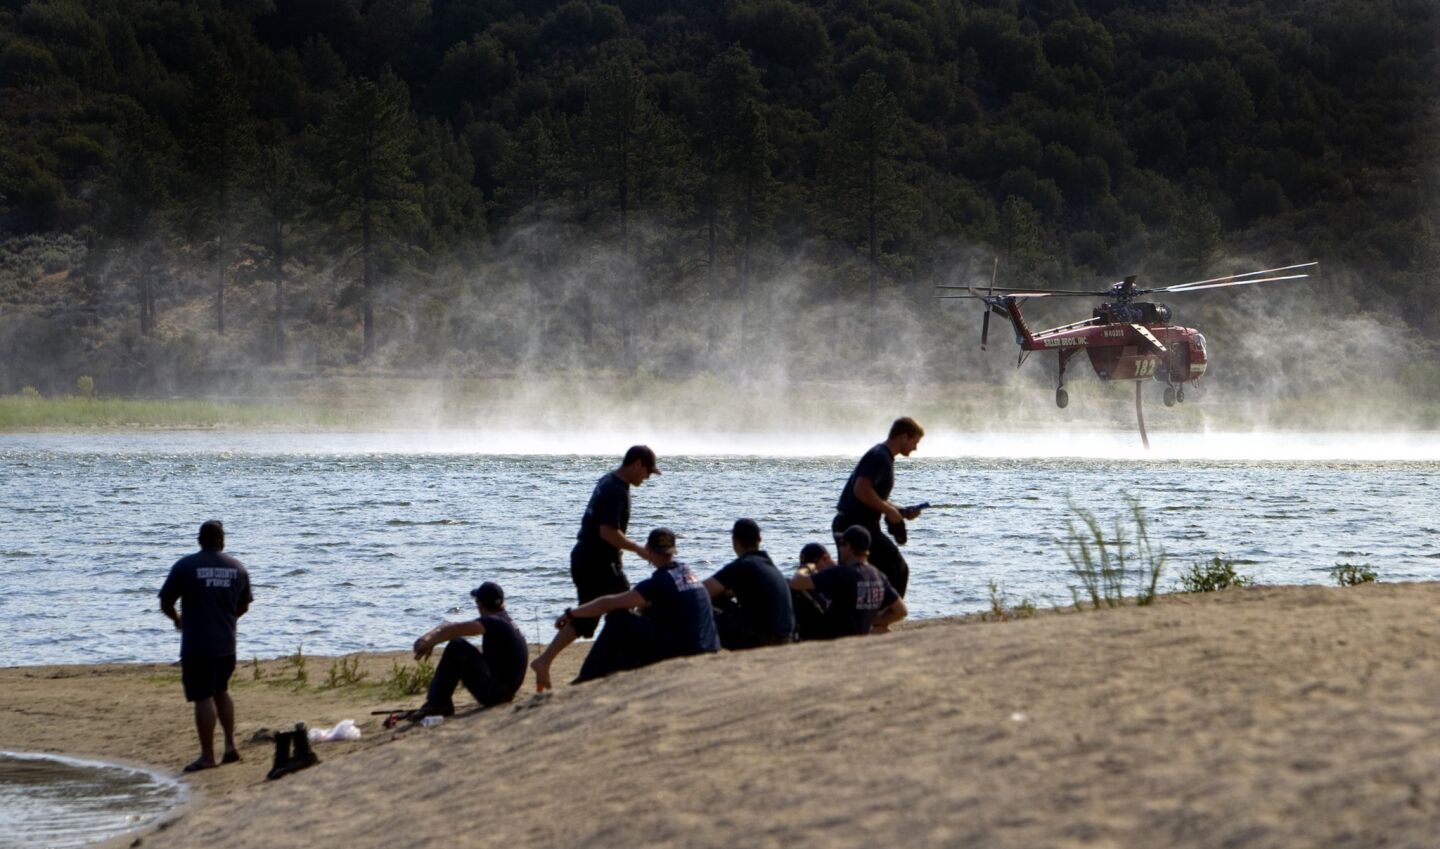 Kern County firefighters take a break on the shores of Lake Hemet as a water-dropping helicopter refills during the Mountain fire off Highway 74.